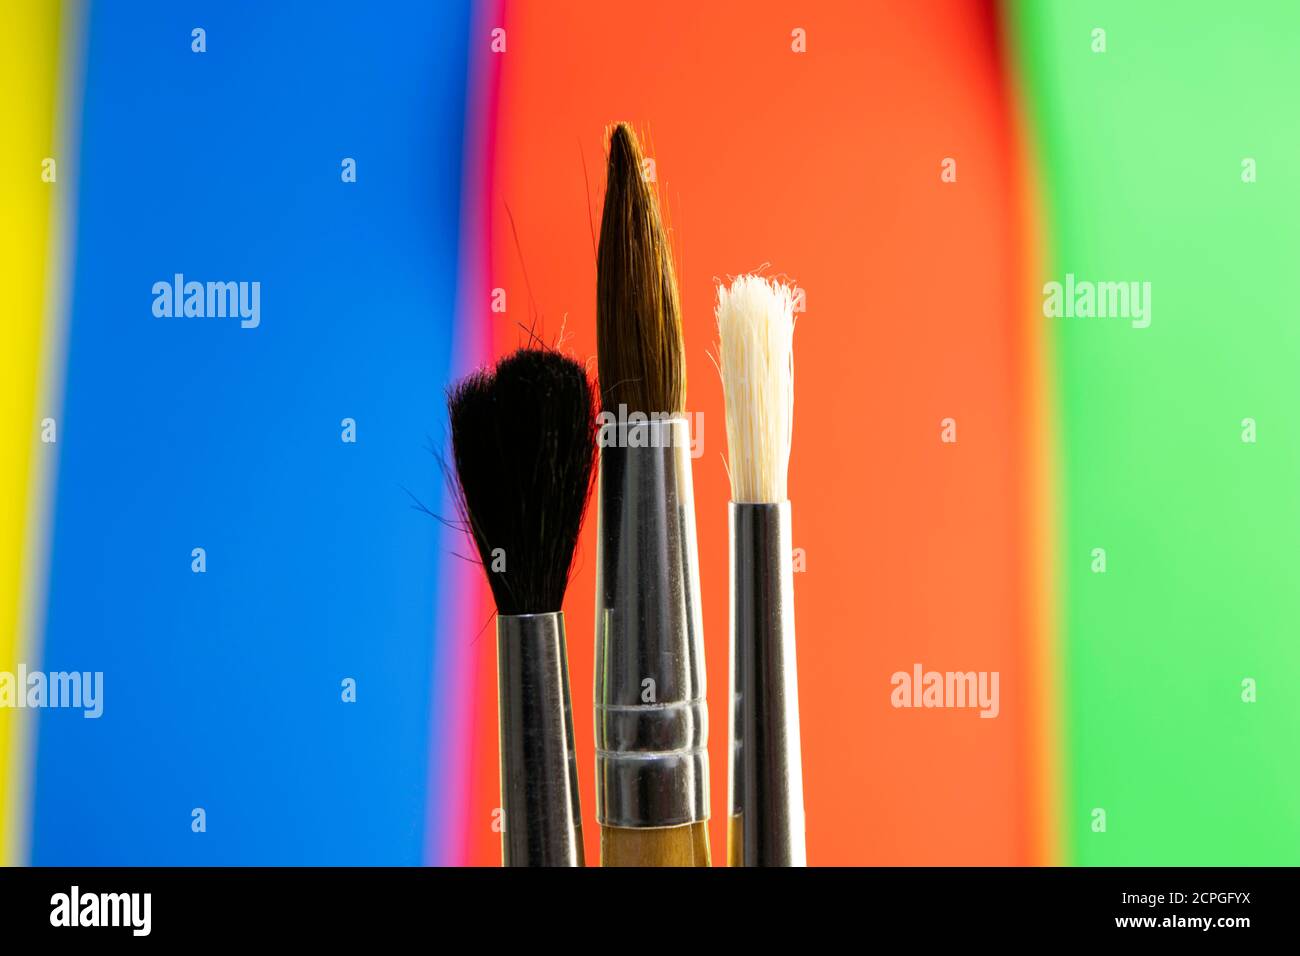 paint brushes on color blurred red-blue-green-yellow background Stock Photo